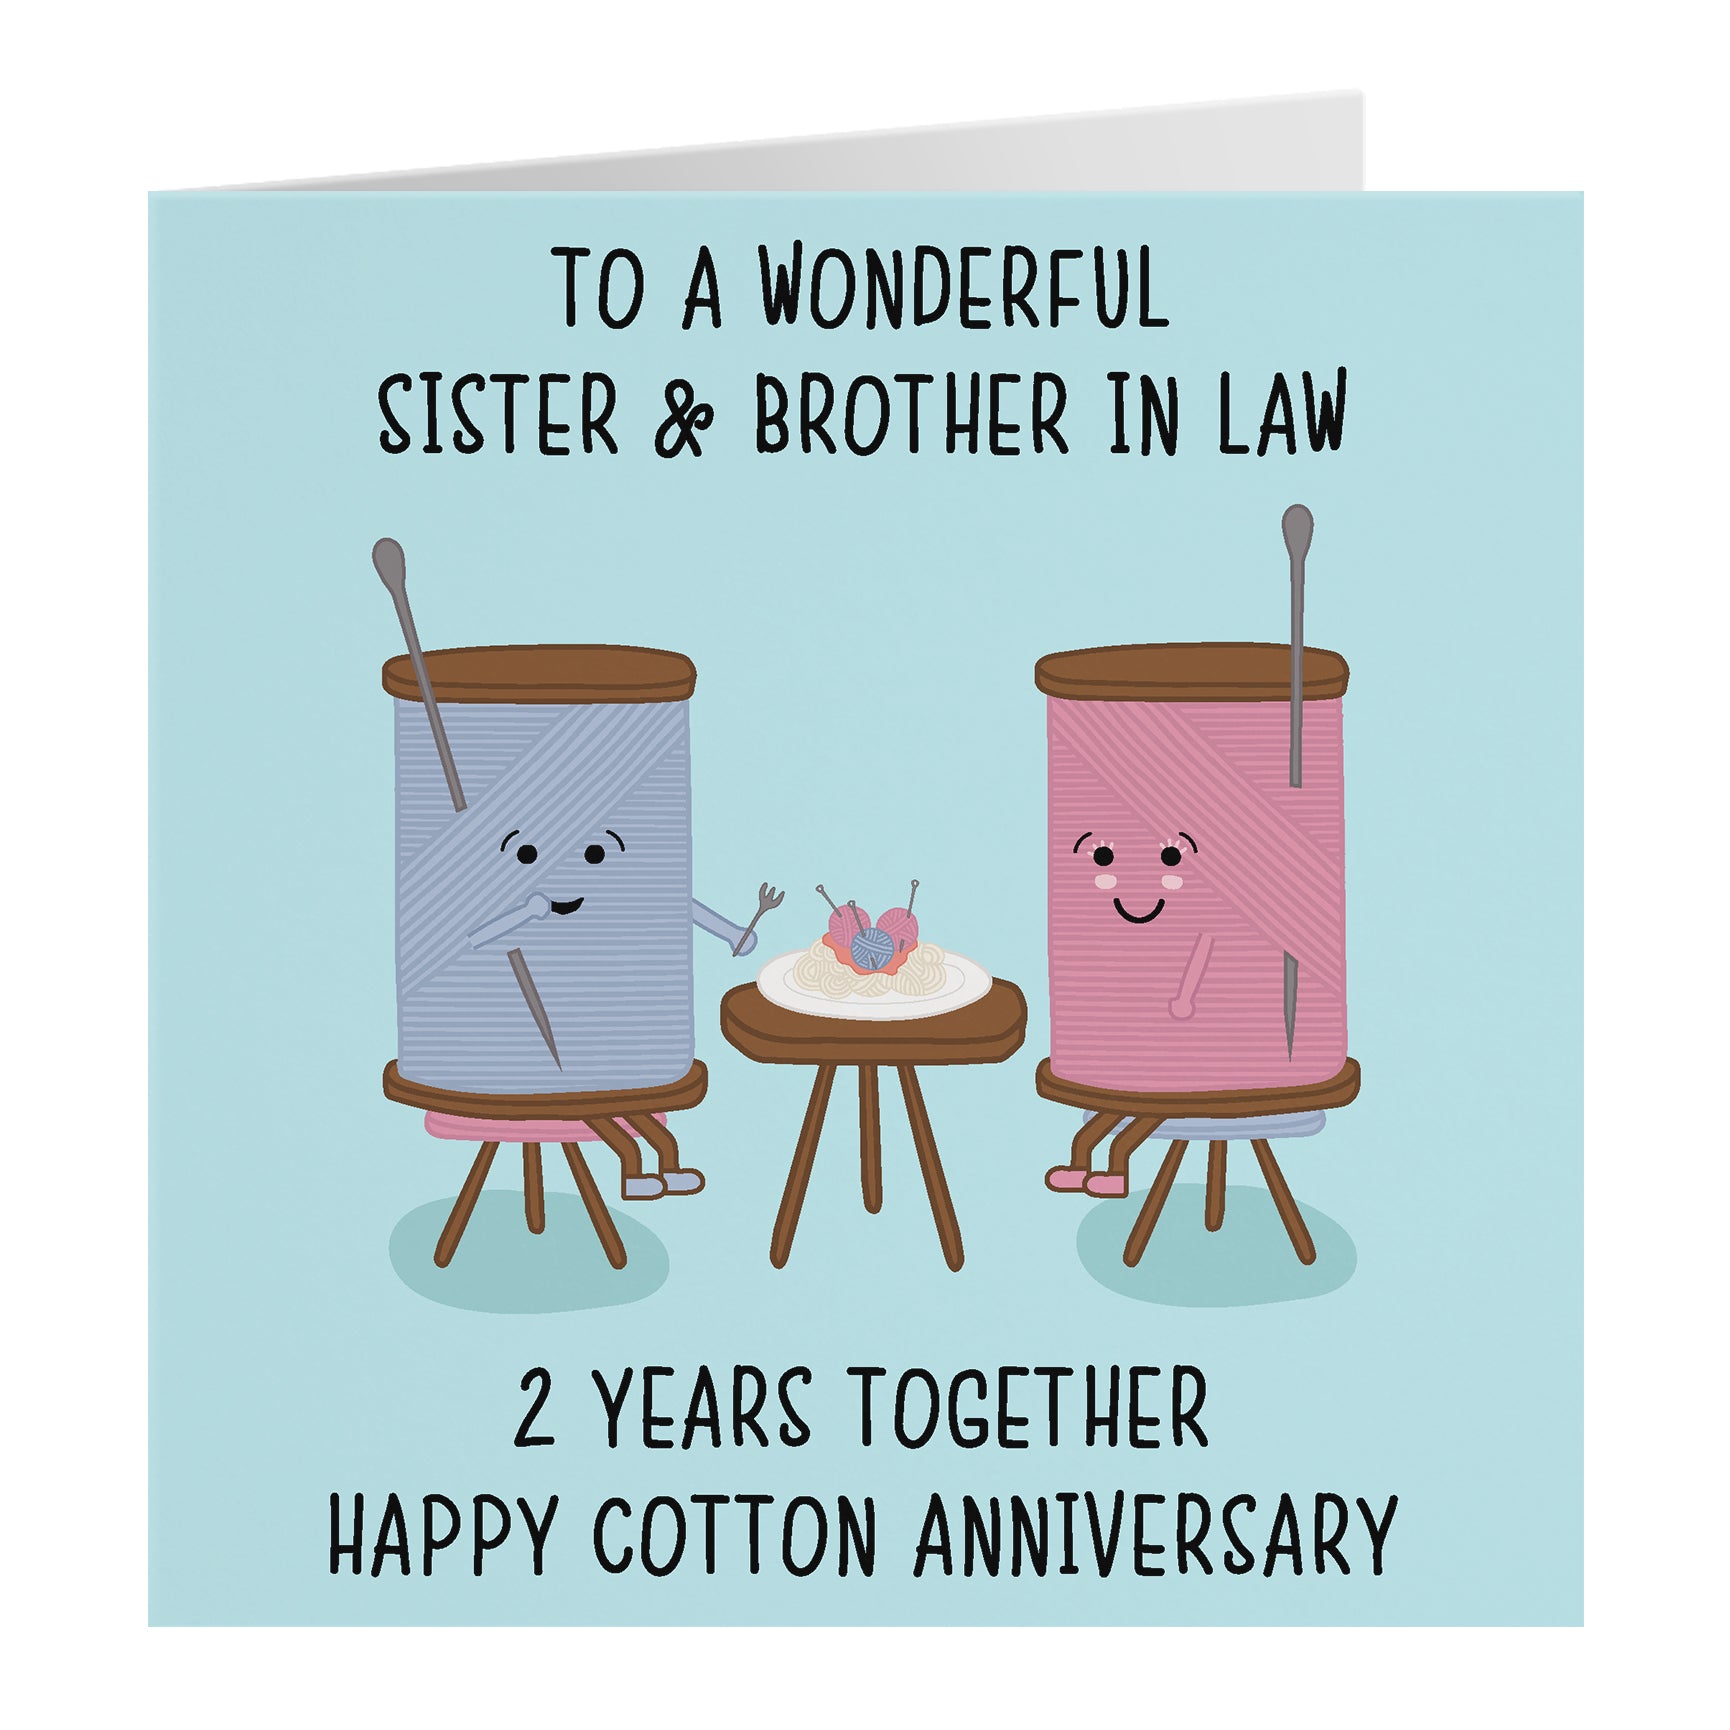 Sister & Brother-in-Law Anniversary Cards - Cute